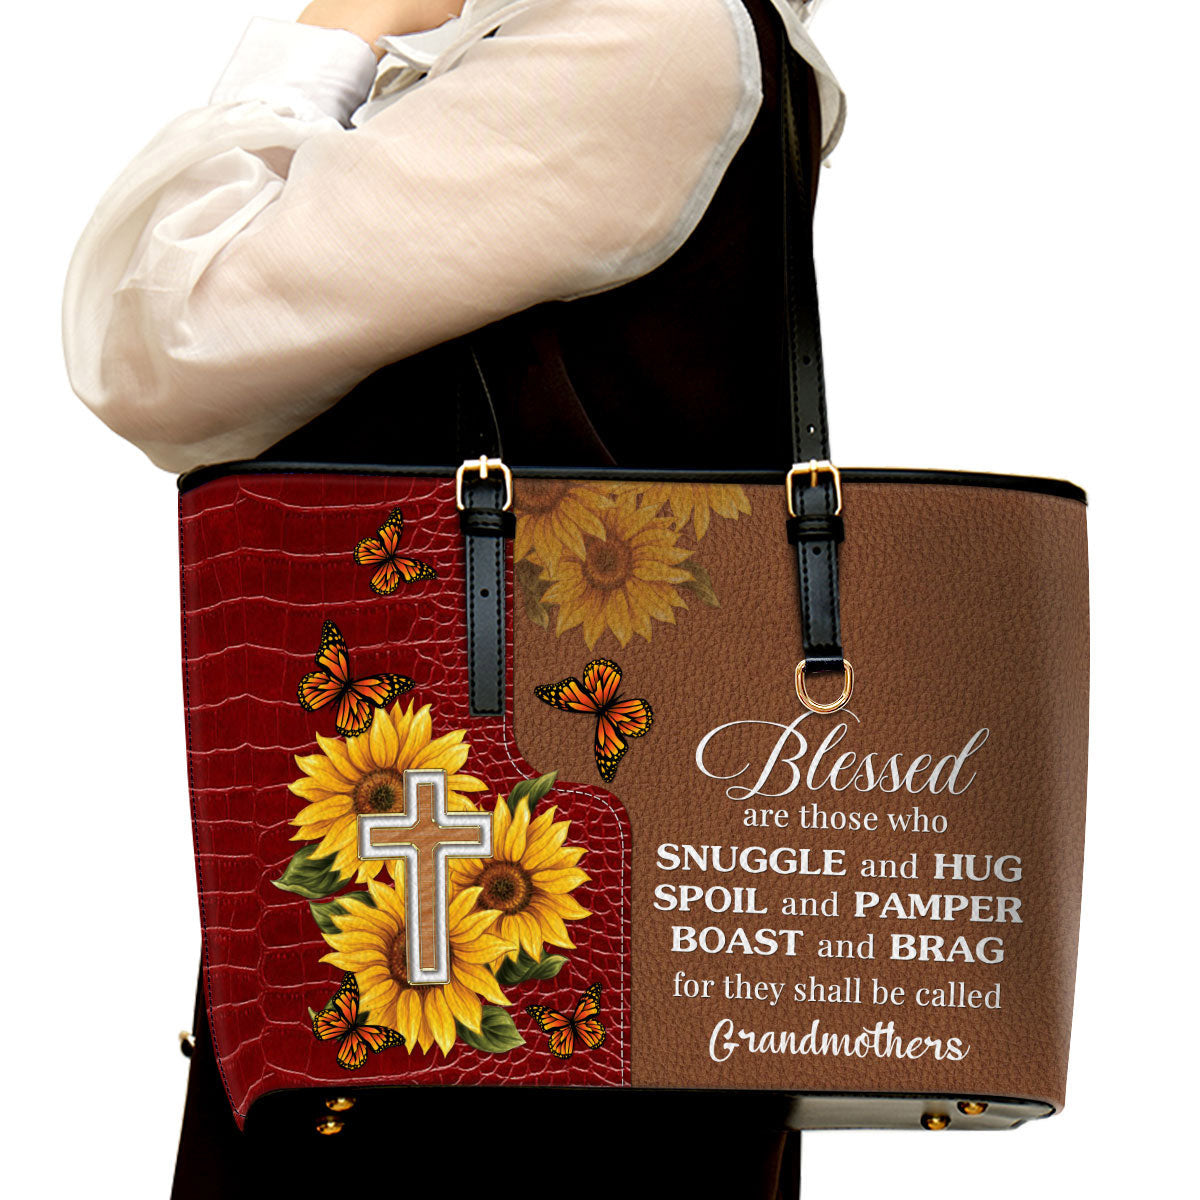 Blessed Are Those Who Snuggle And Hug Personalized Large Leather Tote Bag - Christian Gifts For Women